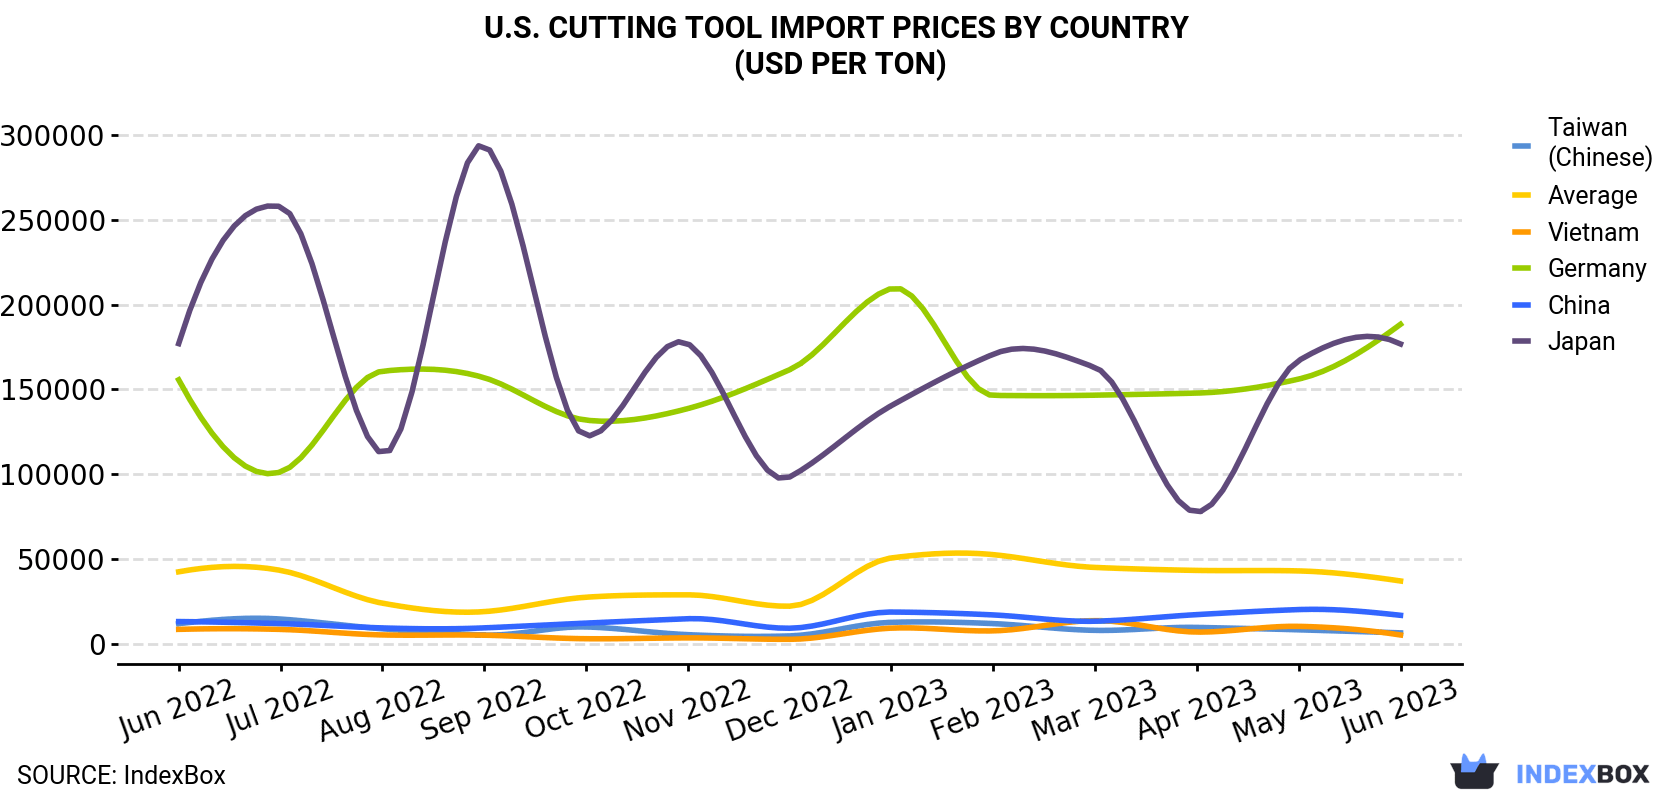 U.S. Cutting Tool Import Prices By Country (USD Per Ton)